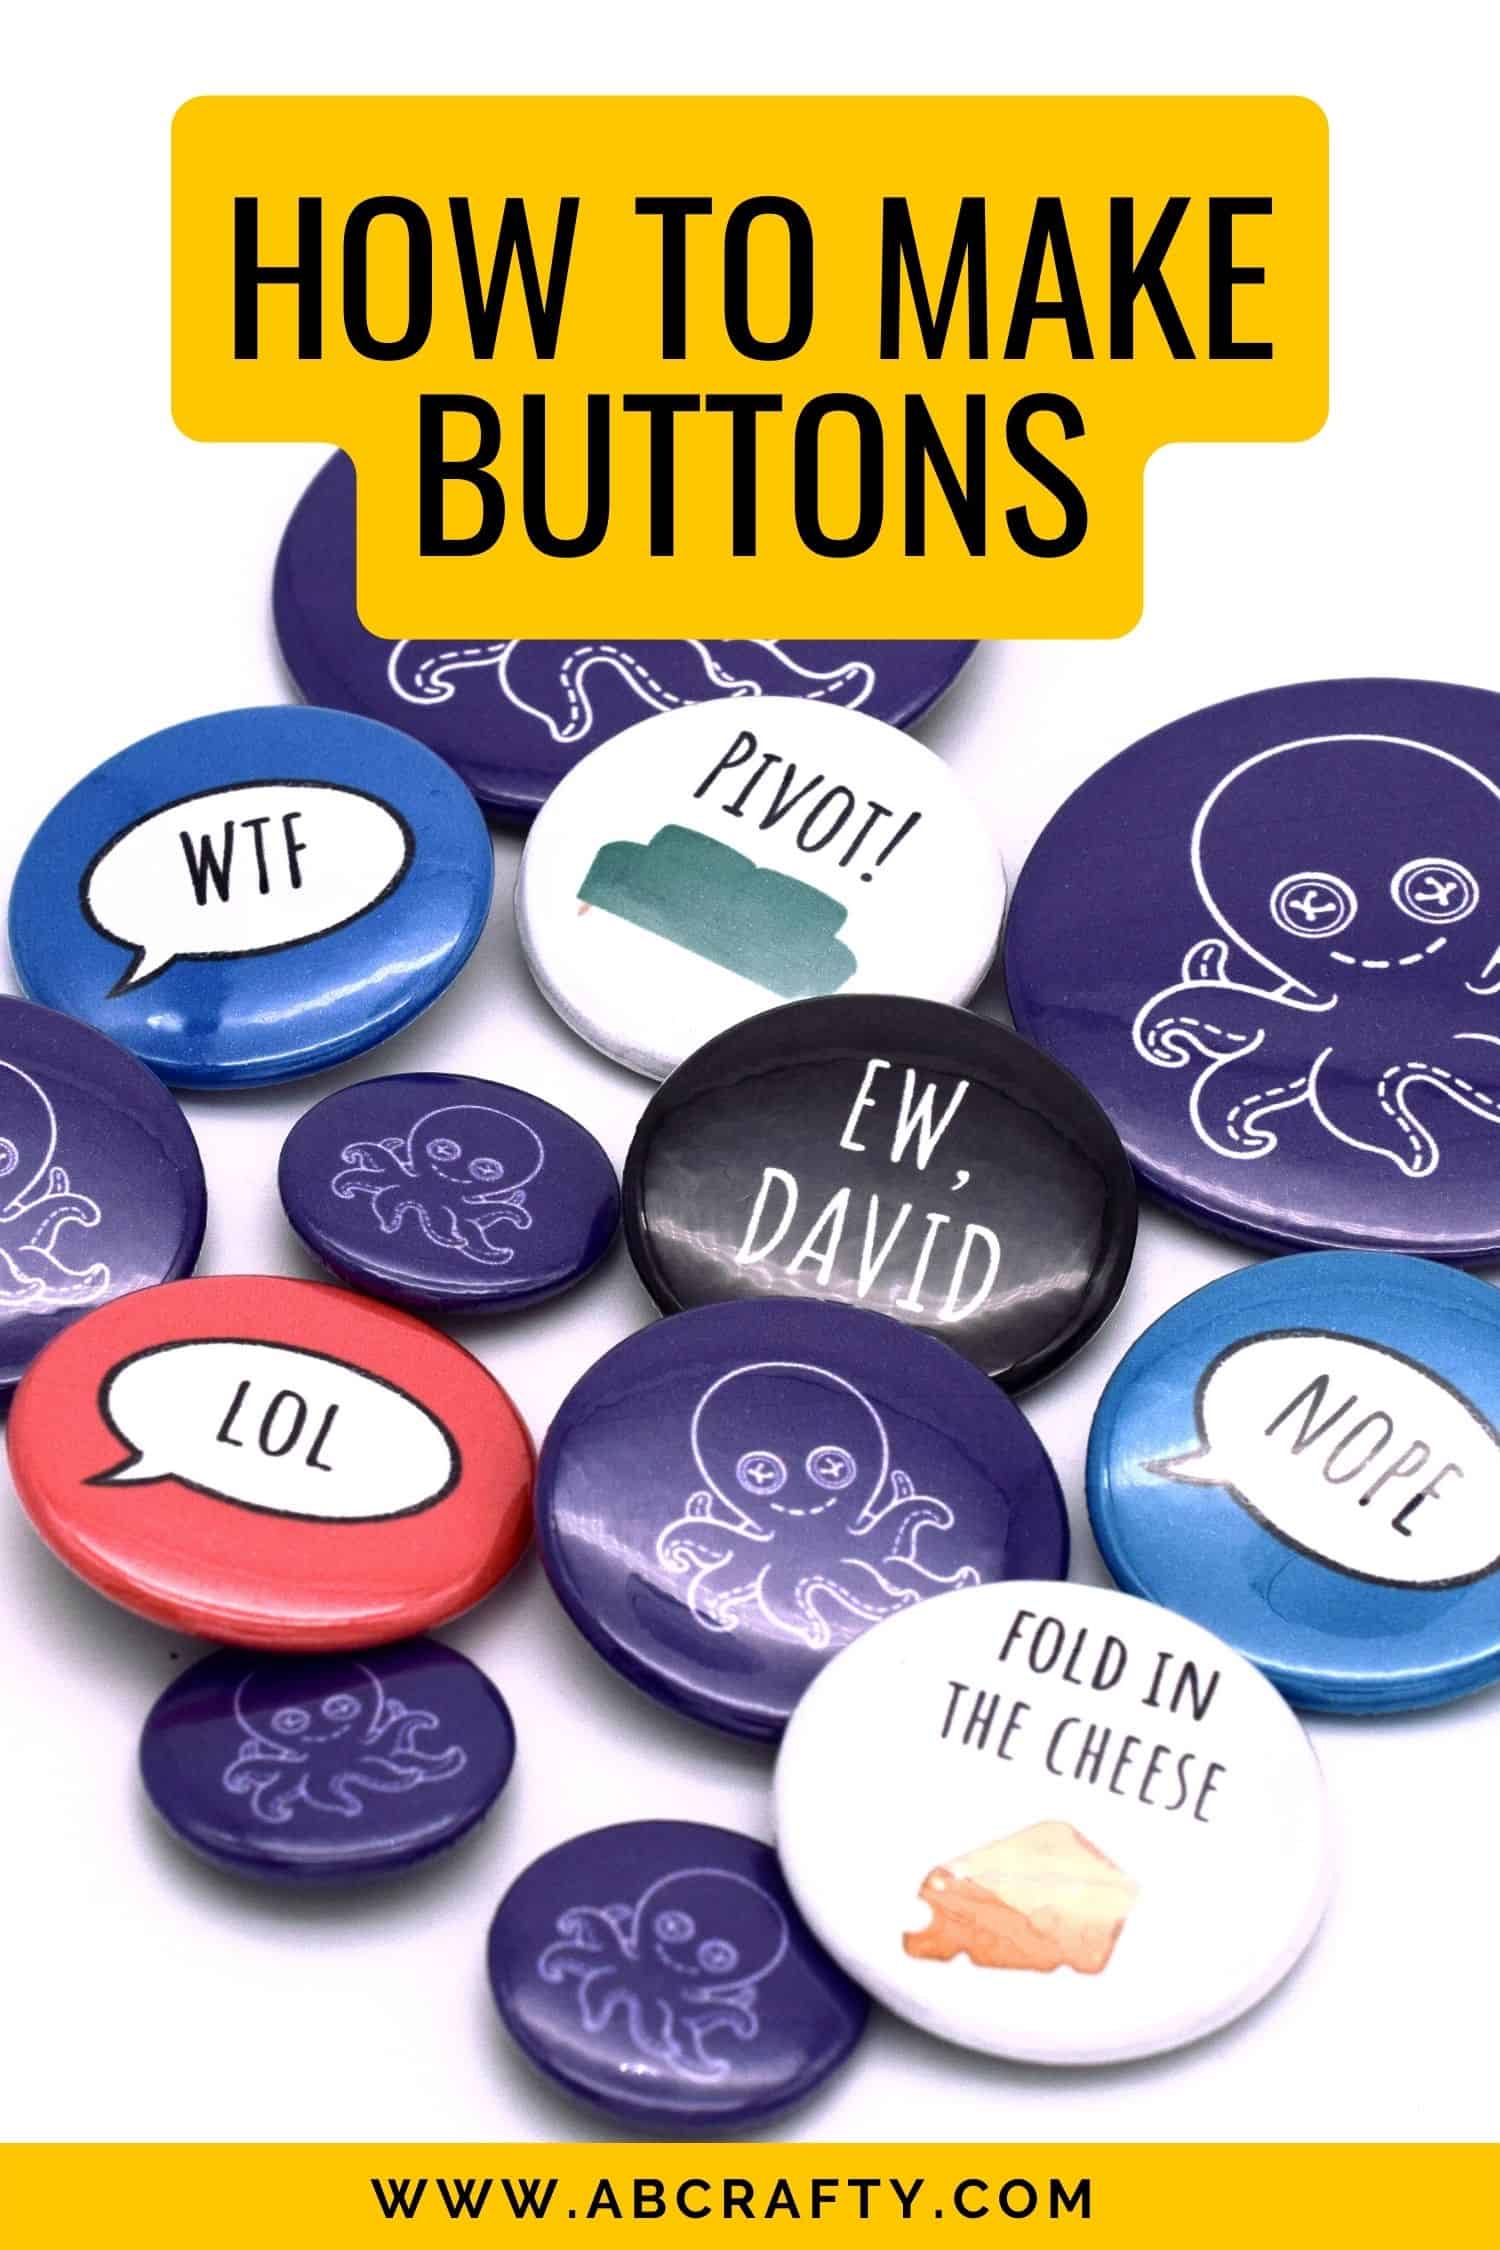 Crafty and Frugal - DIY Button Crafts for Every Style